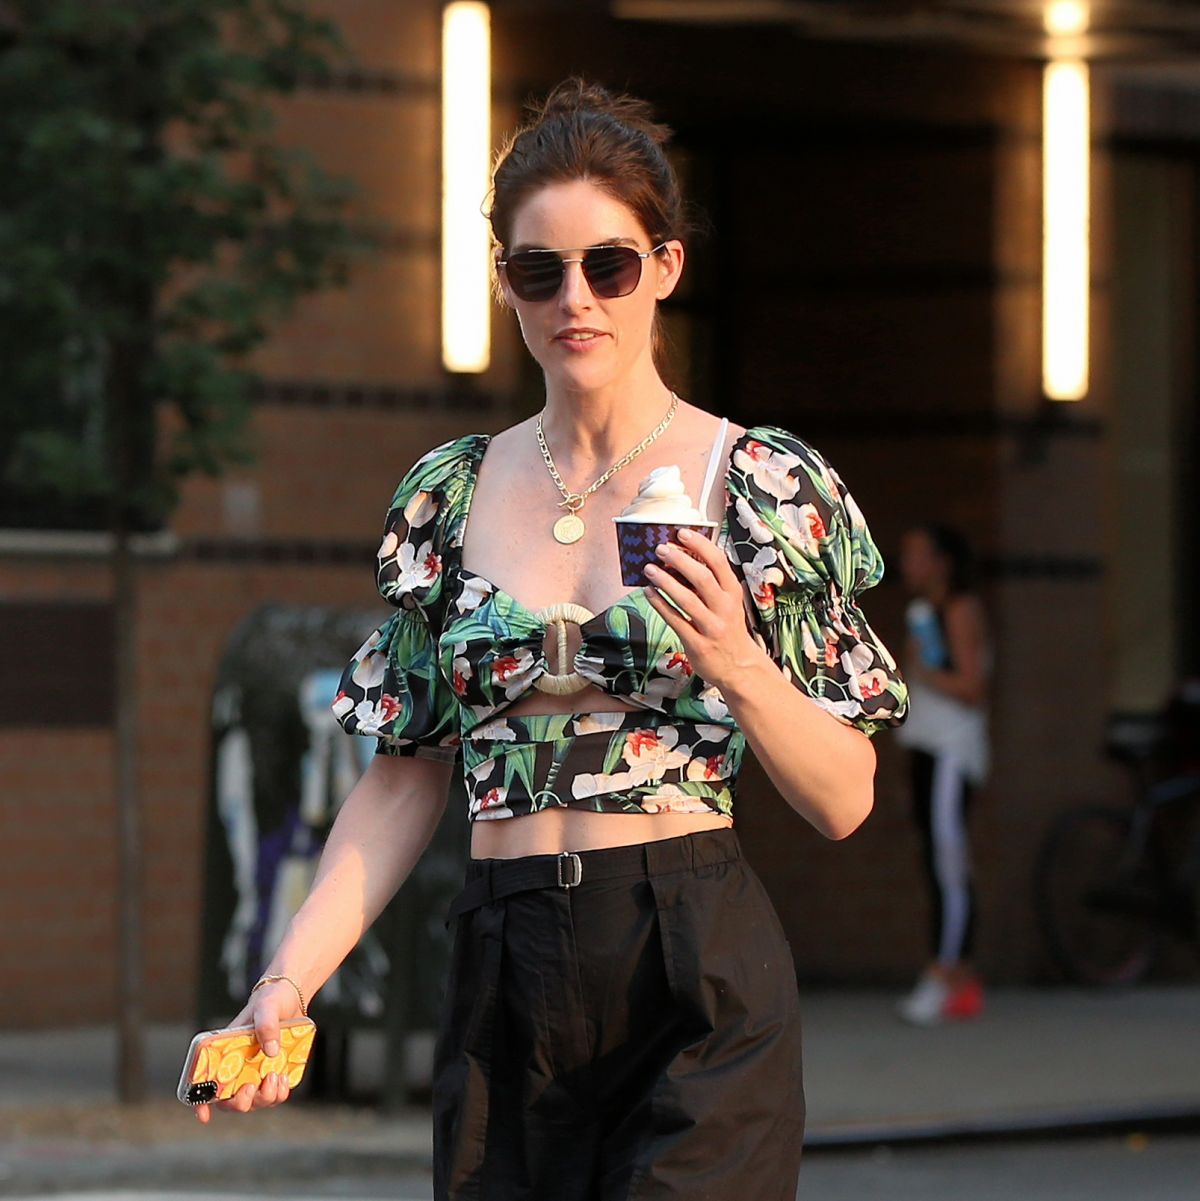 hilary-rhoda-out-and-about-n-new-york-07-16-2019-7.jpg